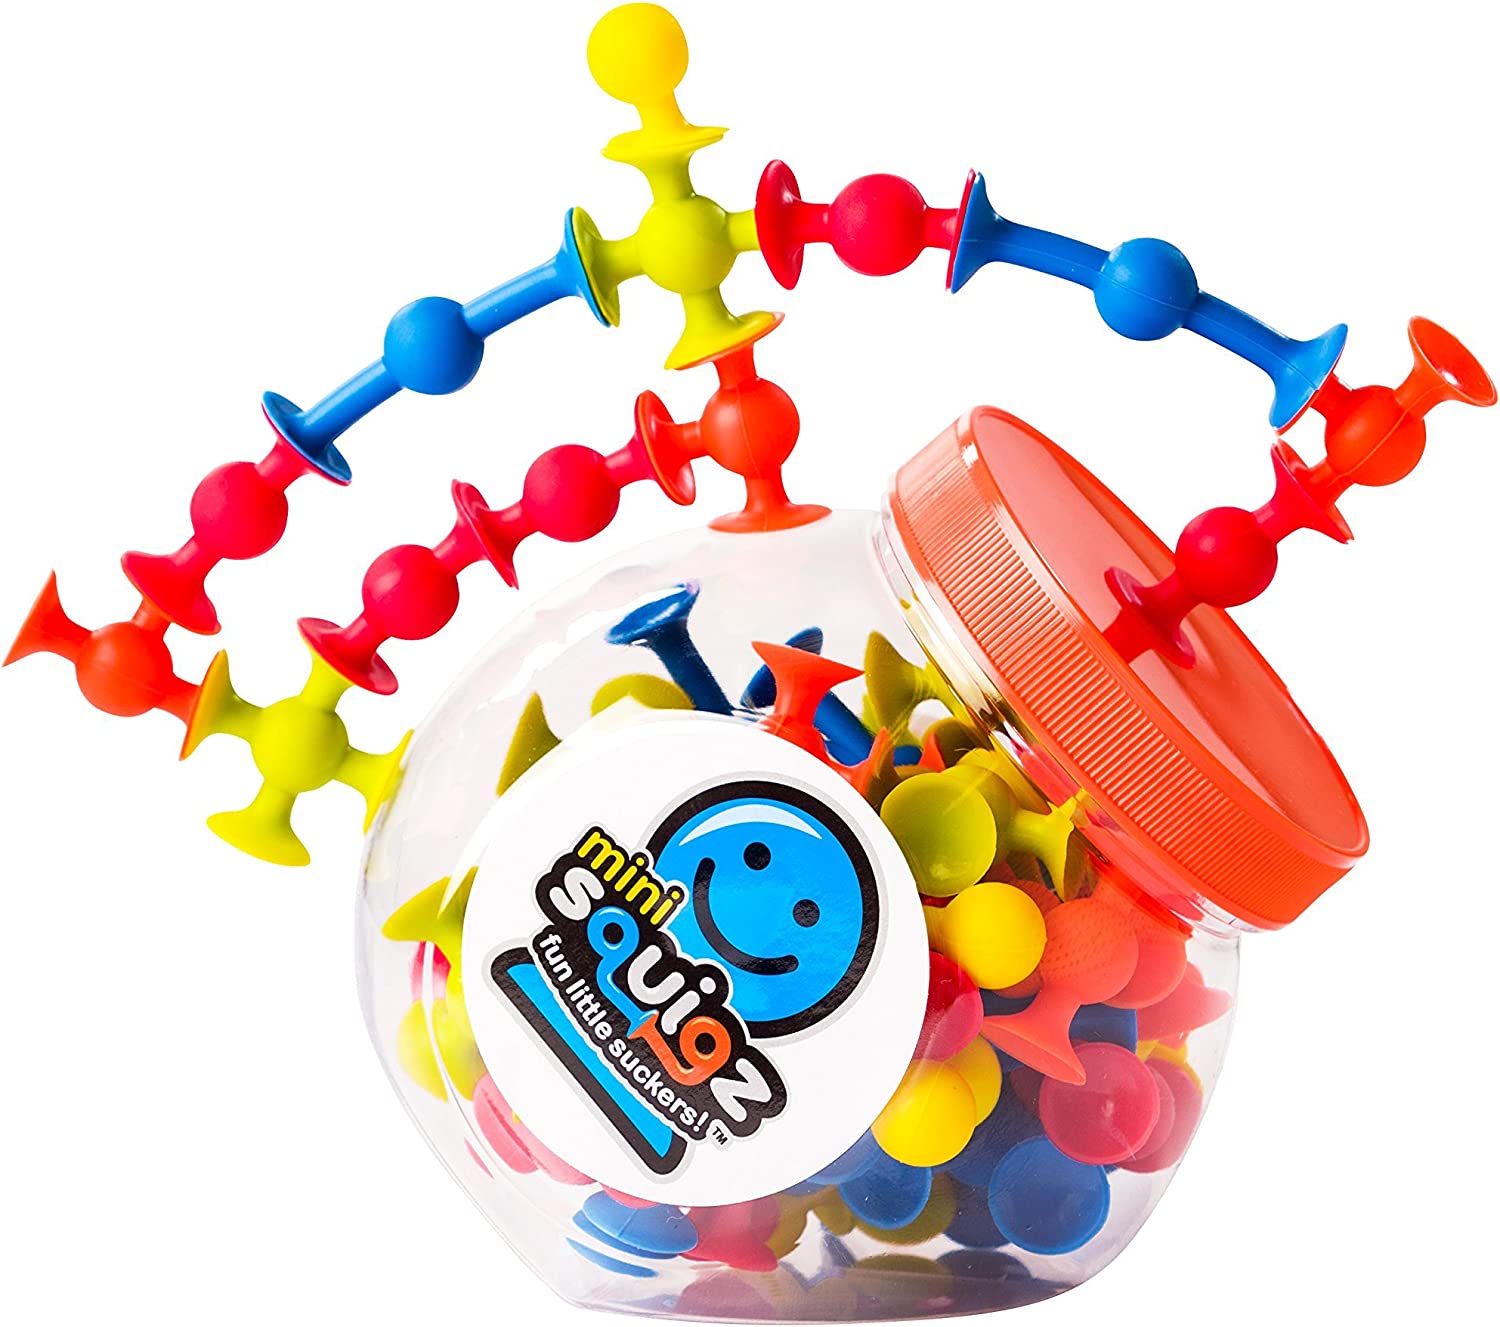 The product container for Mini Squigz with several of the Minis connected in a fun design across the top.